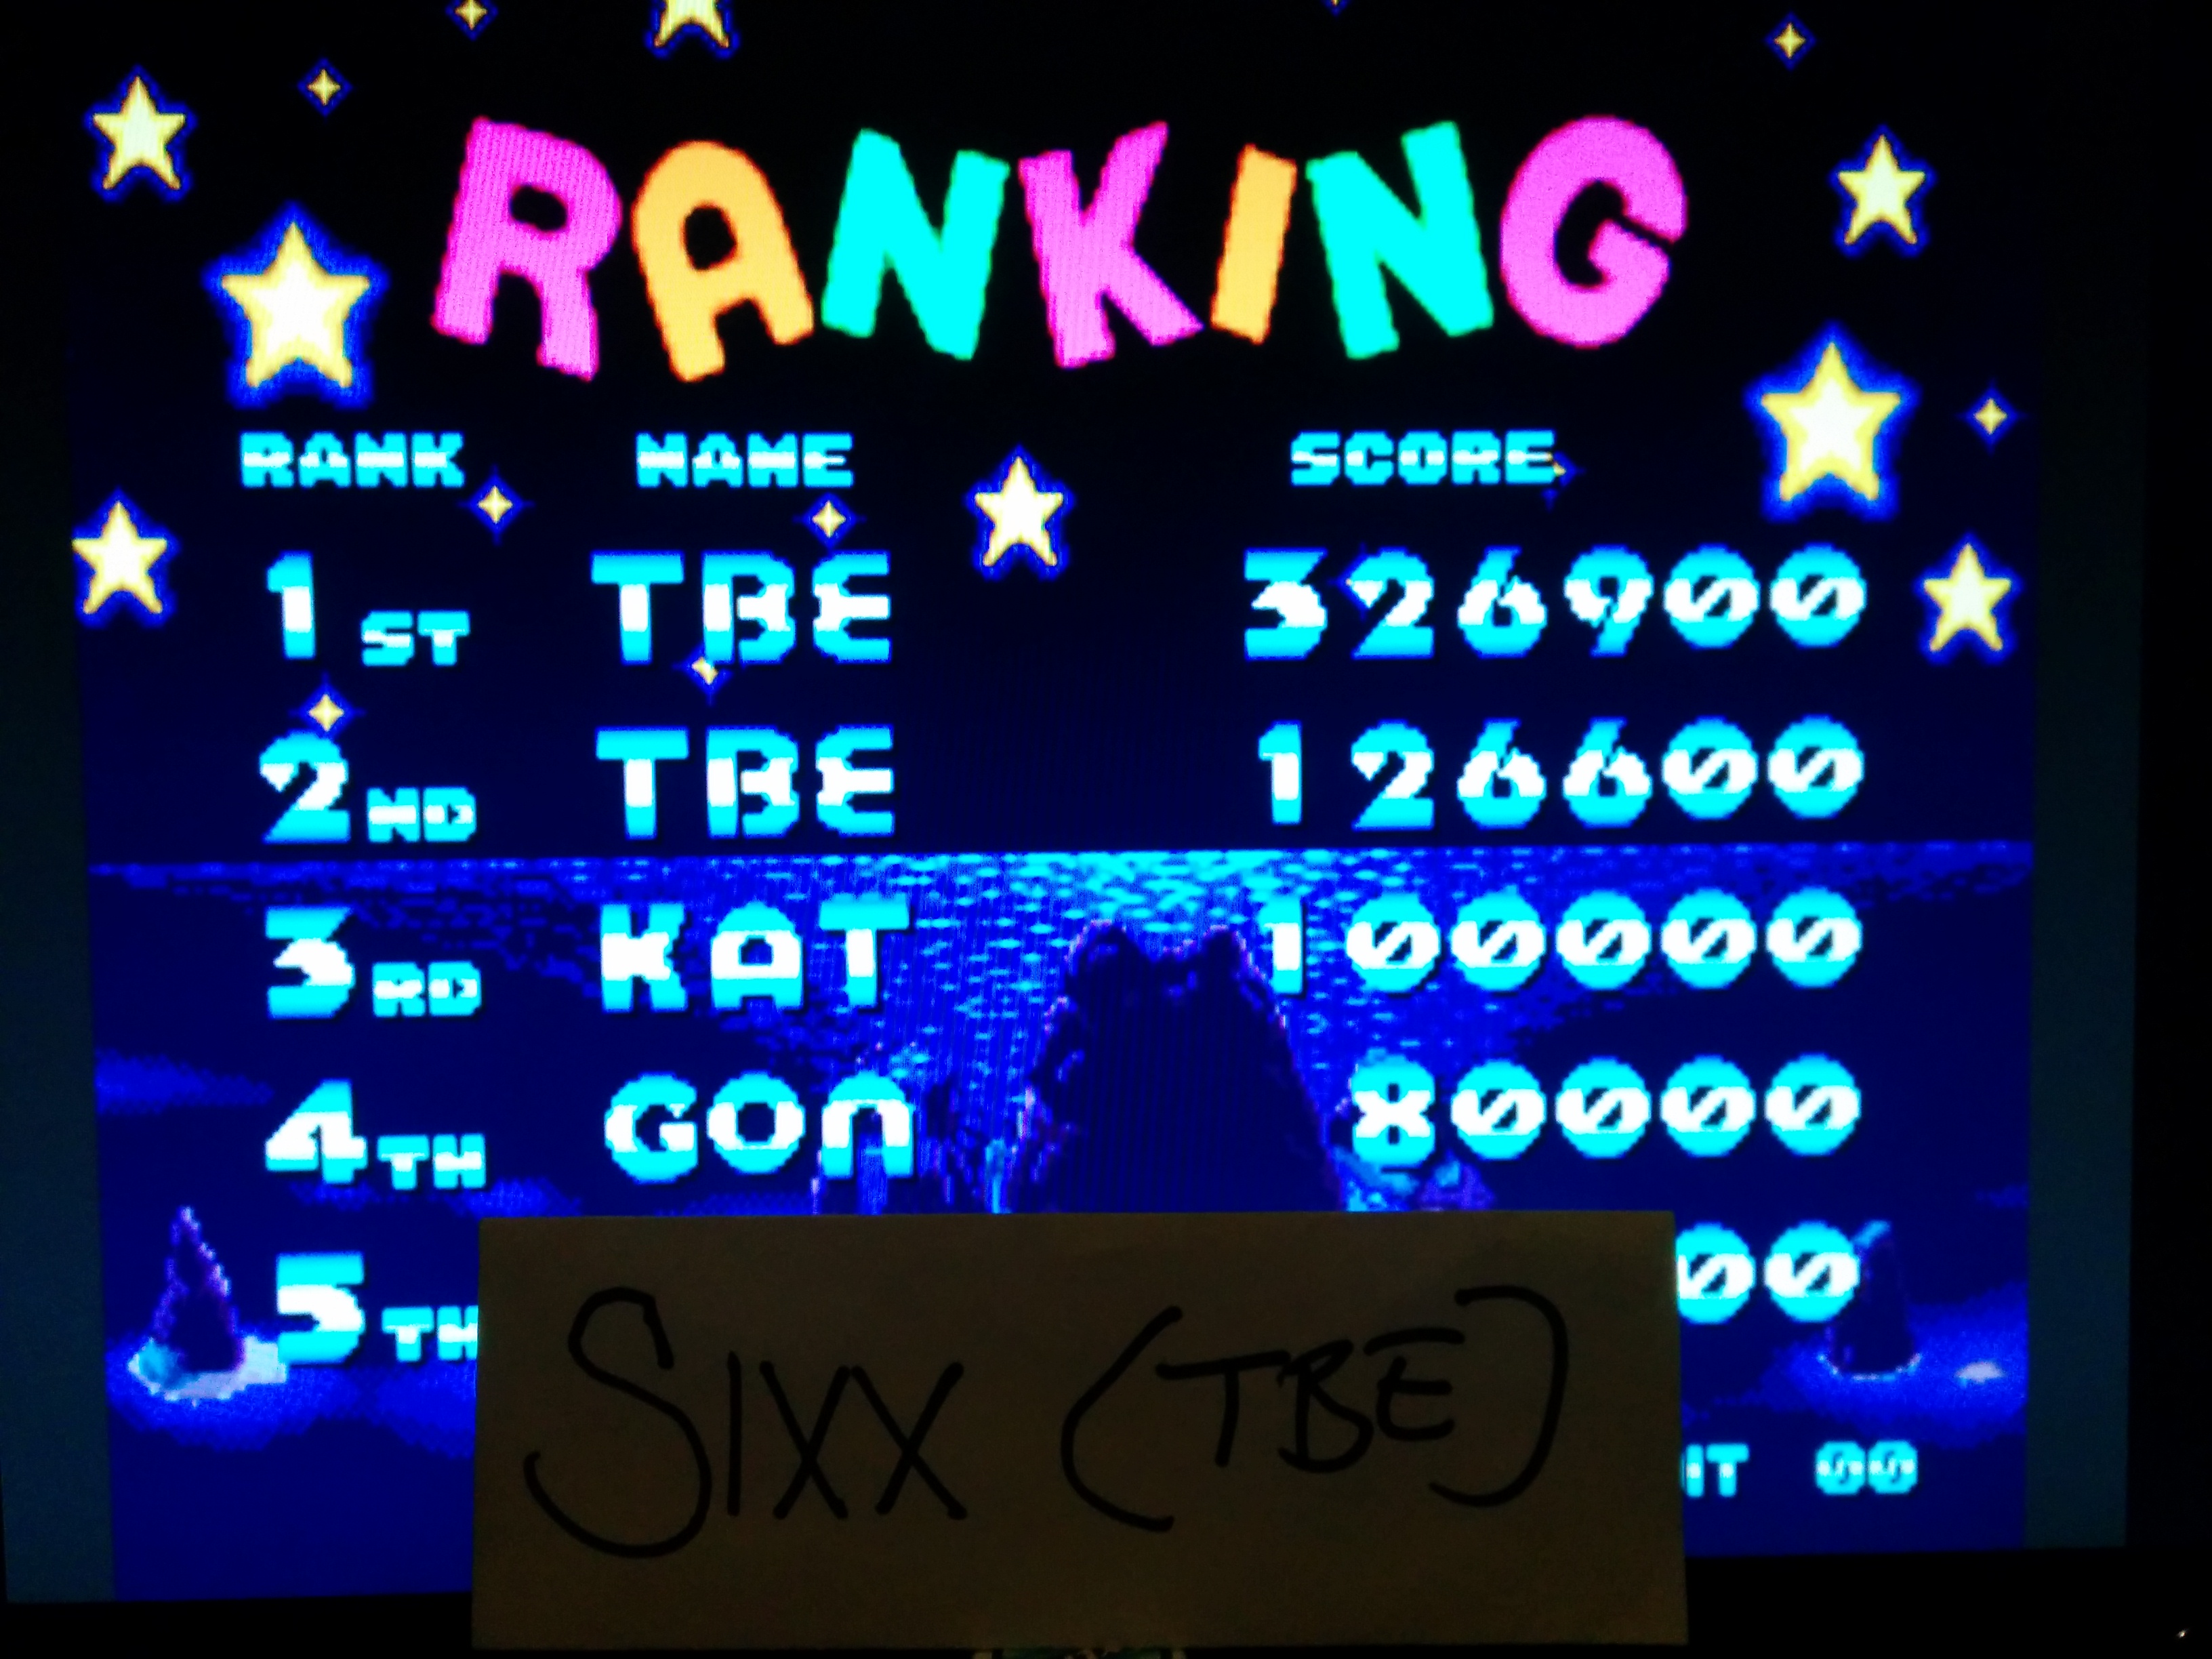 Sixx: Zupapa! (Neo Geo Emulated) 326,900 points on 2014-06-04 16:47:42